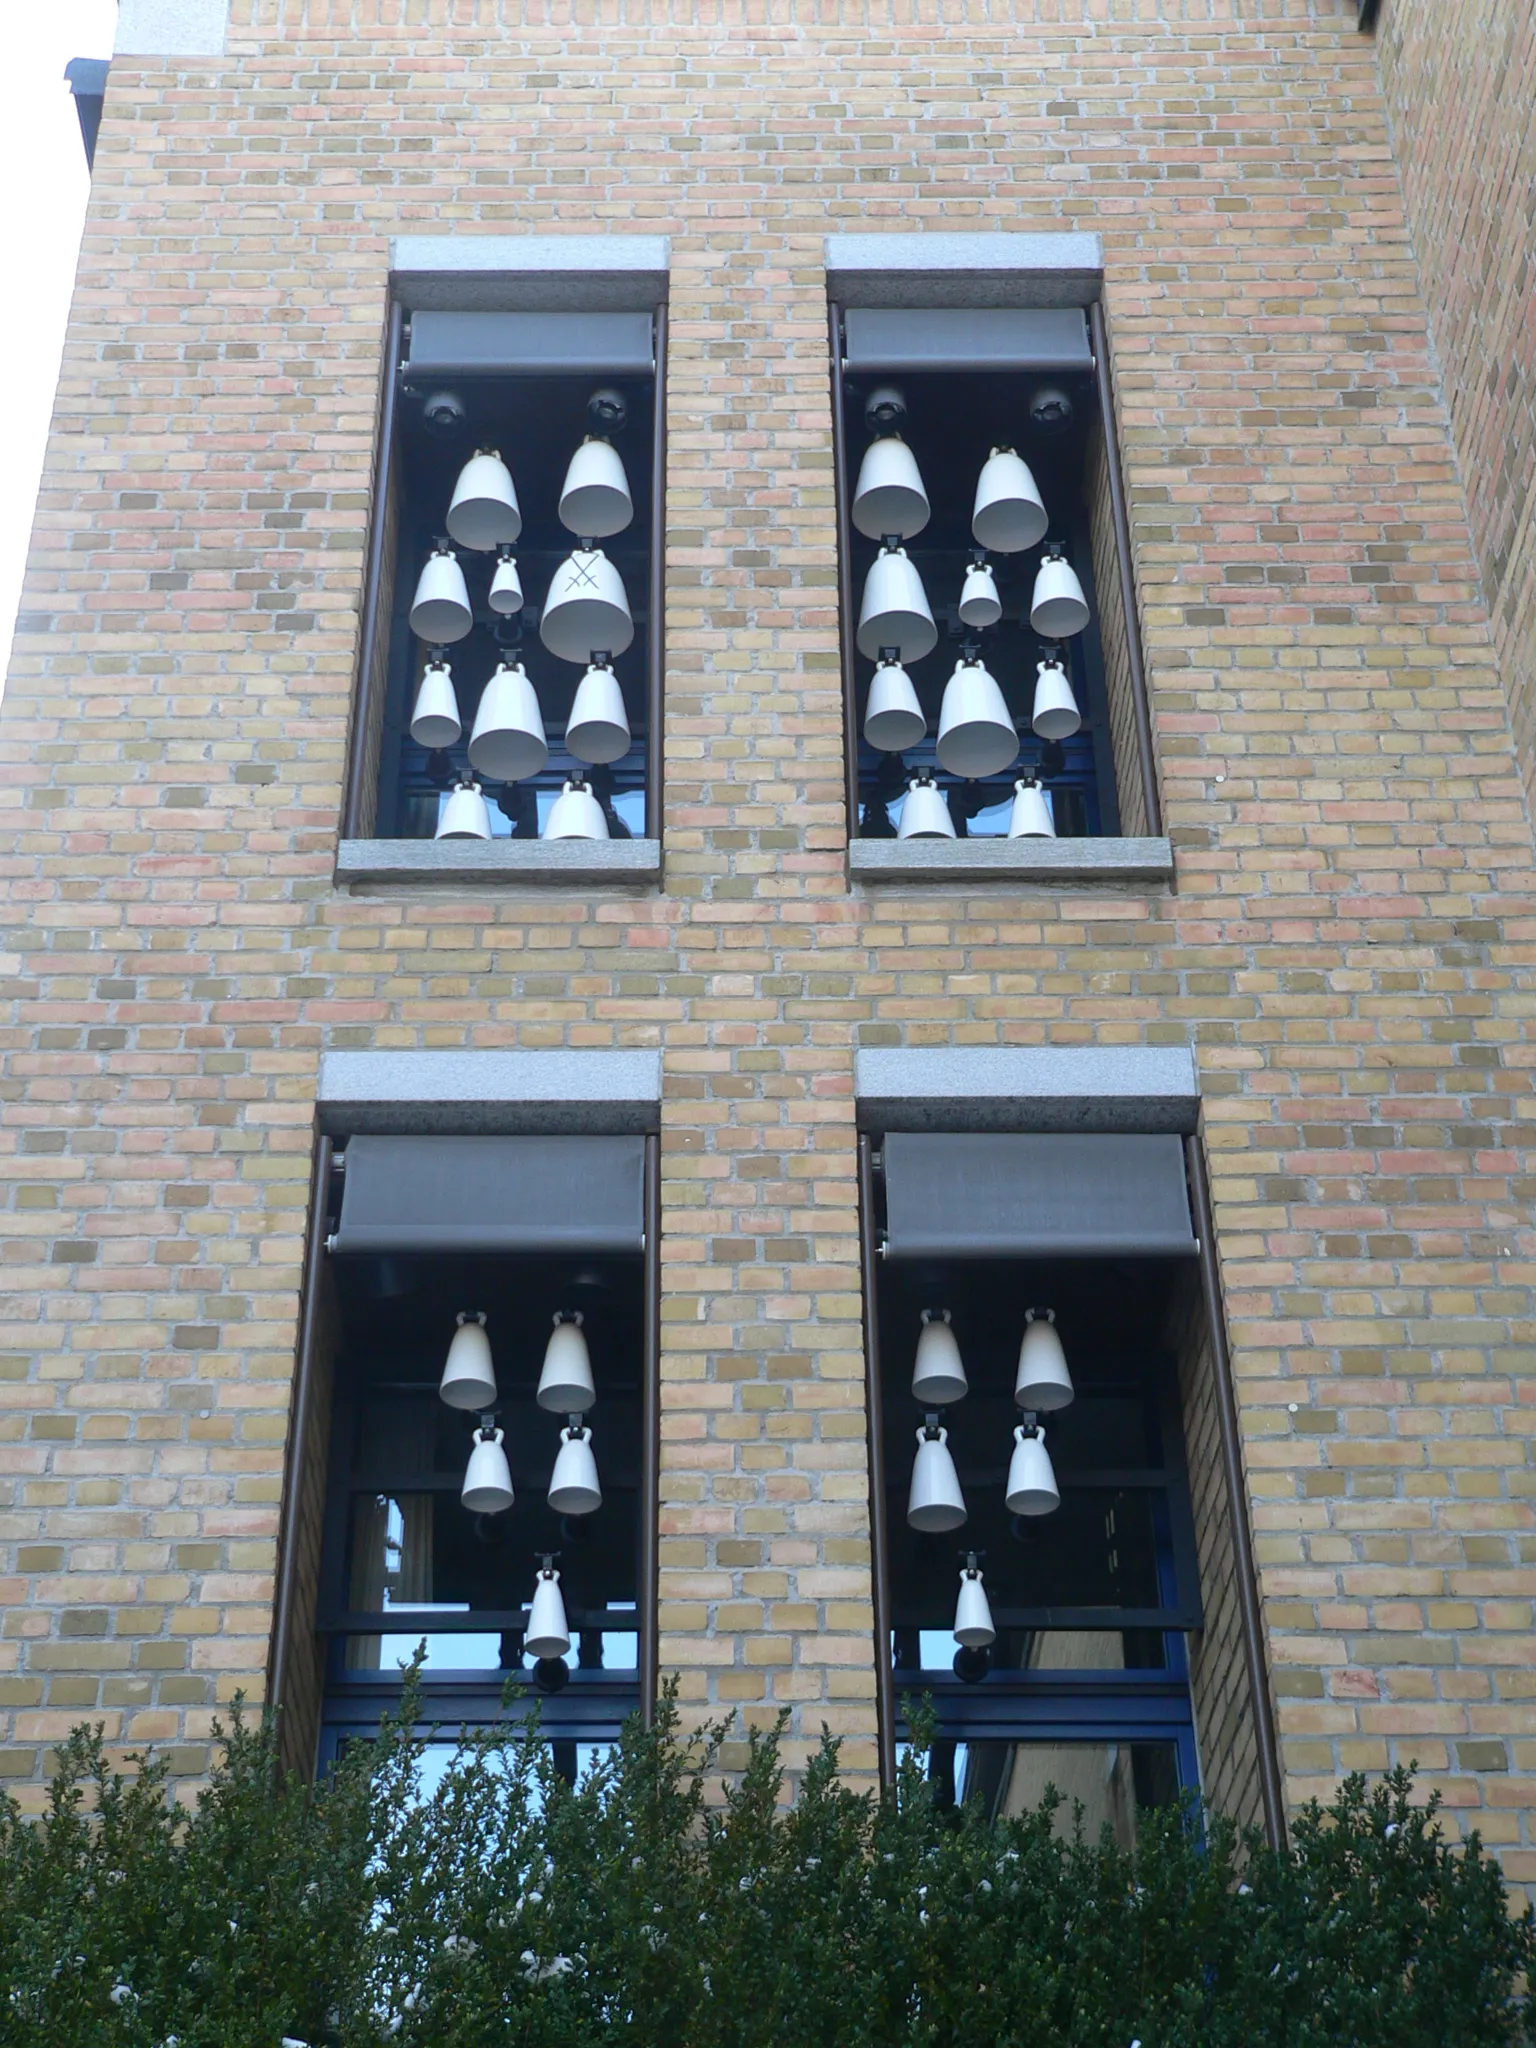 Photo showing: Carillon at the town hall Fellbach, Germany. The bells consist of Meissen porcelain